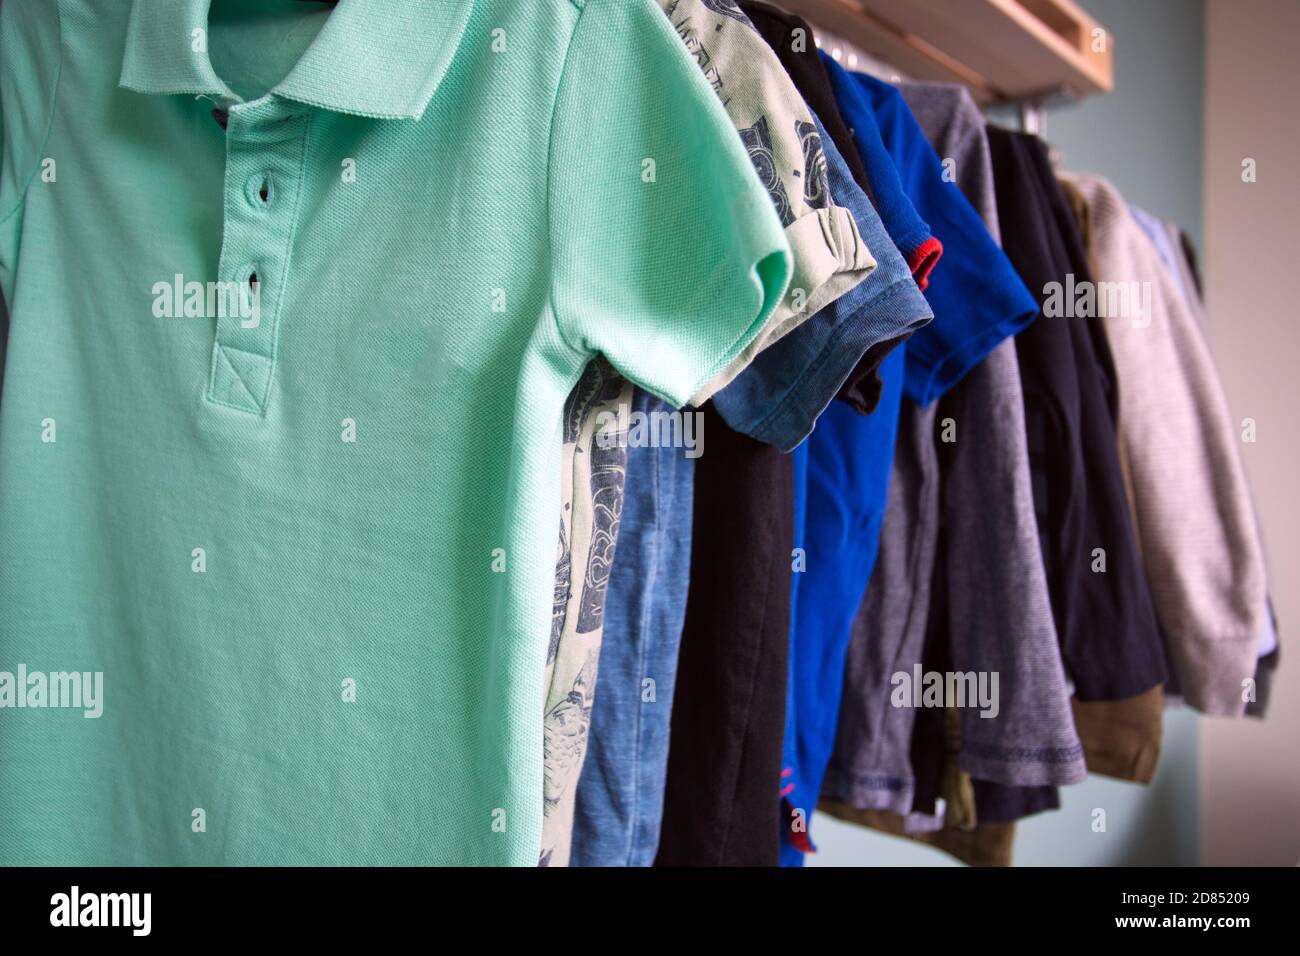 Boys dressing clothes hanging in metal rack, childrens room of boys storage in room Stock Photo